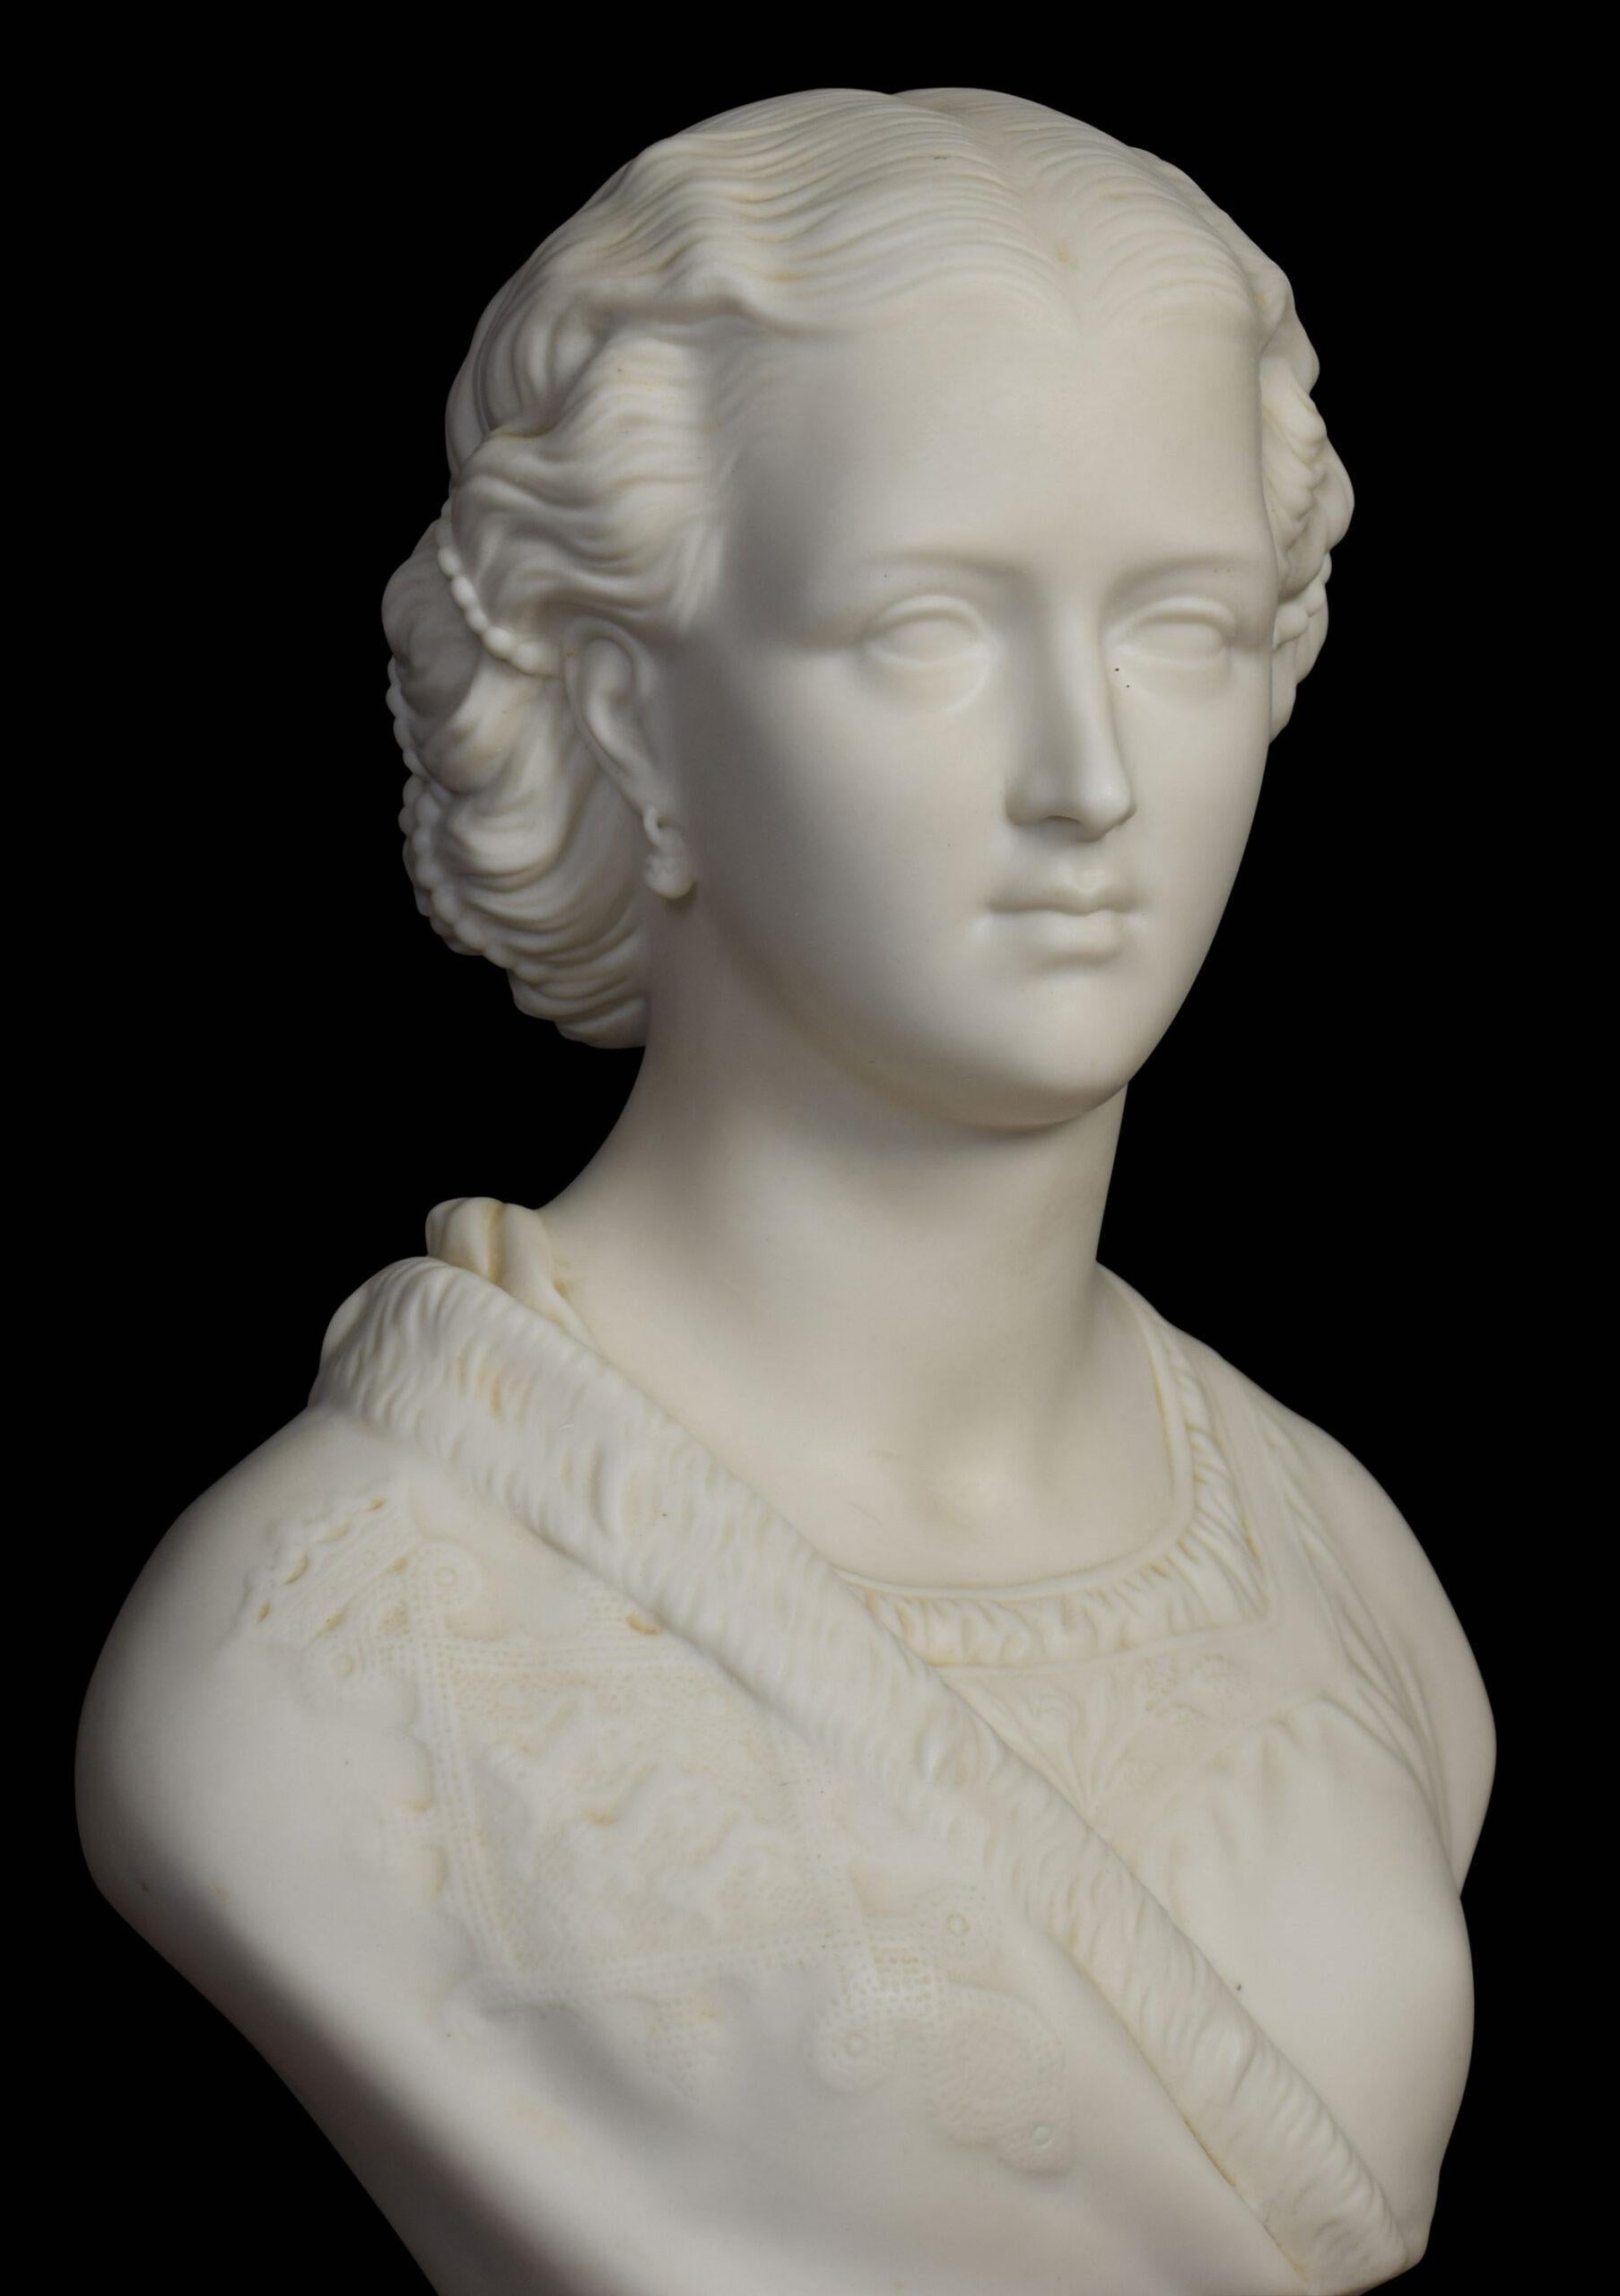 Copeland Parian bust of the Young Queen Victoria raised on a circular pedestal base.
Dimensions:
Height 12 inches
Width 7.5 inches
Depth 5 inches.